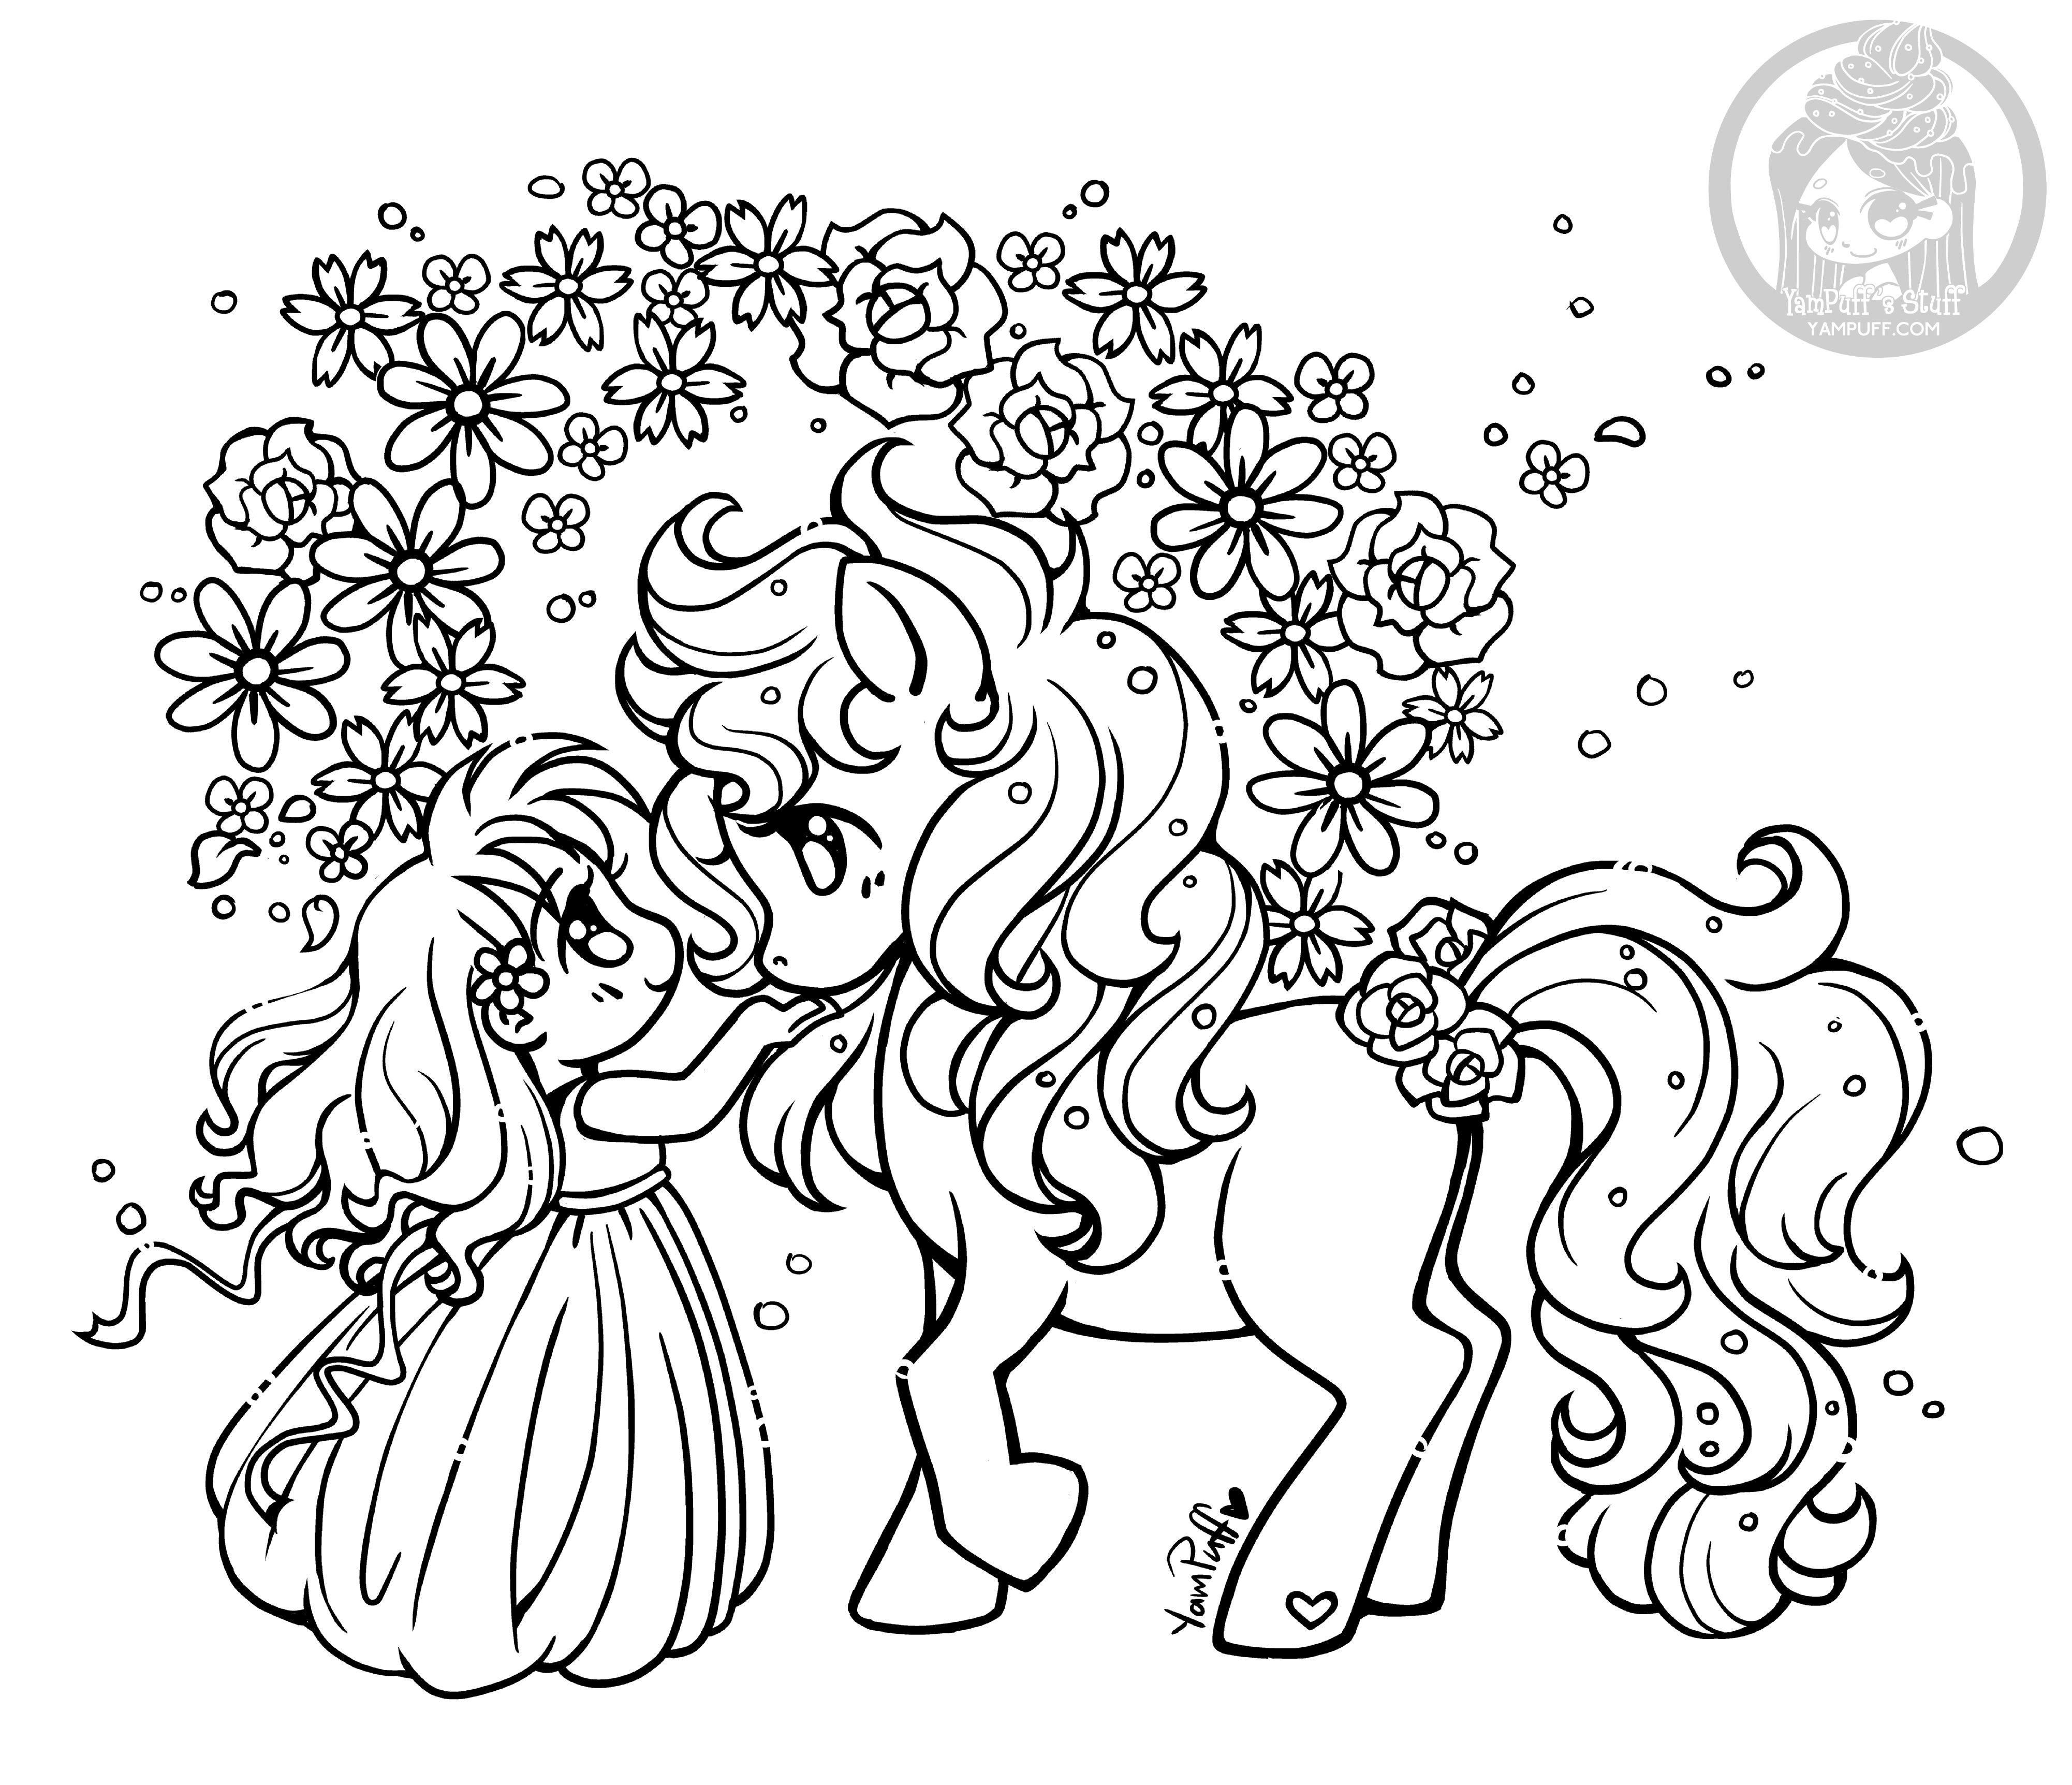 Ponies - Pony Coloring Pages • YamPuff's Stuff